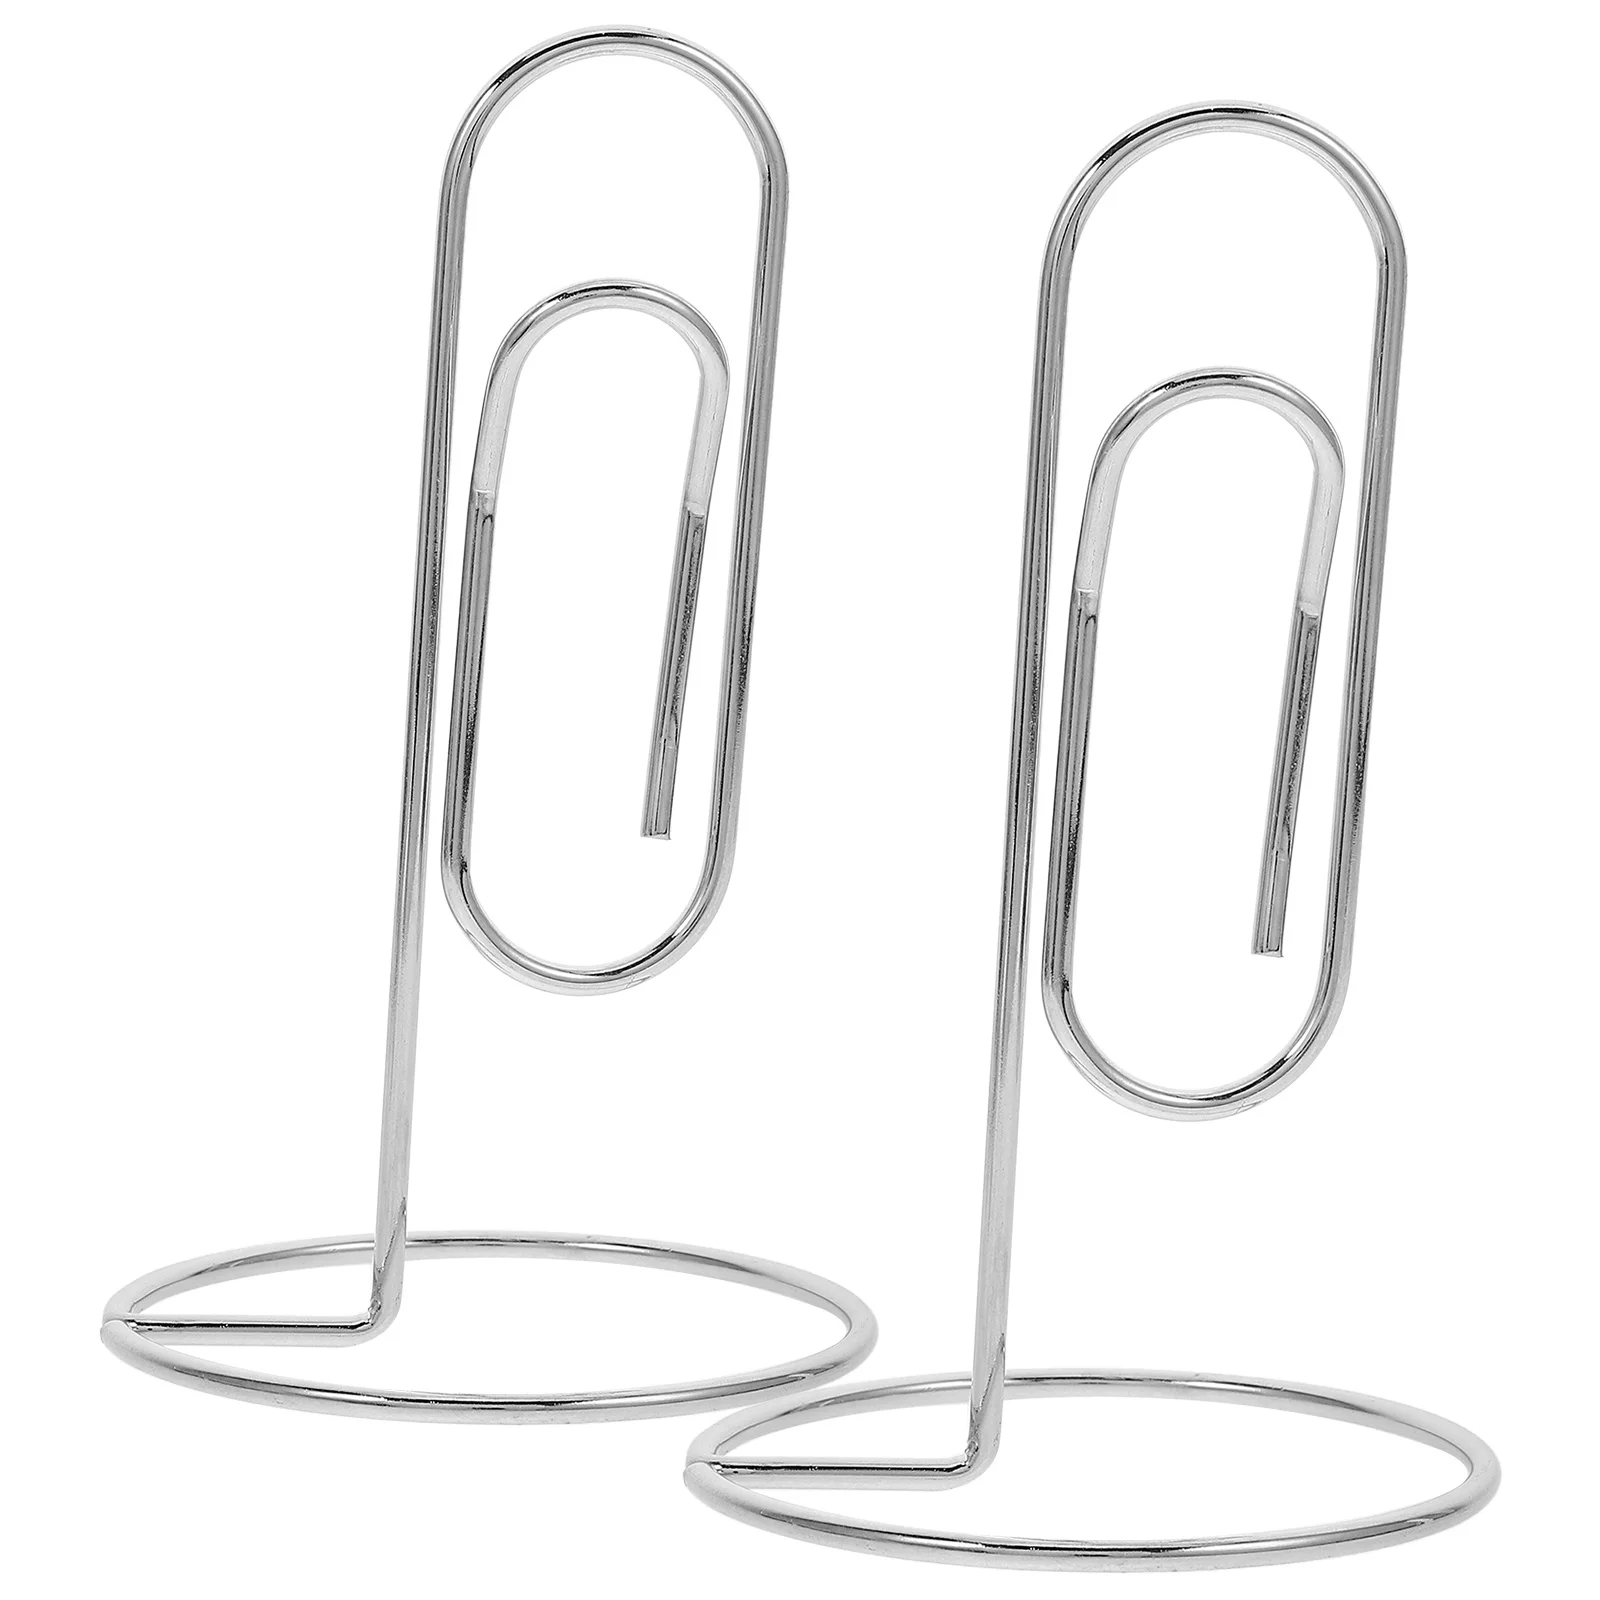 

2 Pcs Paper Clip Note Holder Card Picture Photo Folder Stand Iron Place Holders for Table